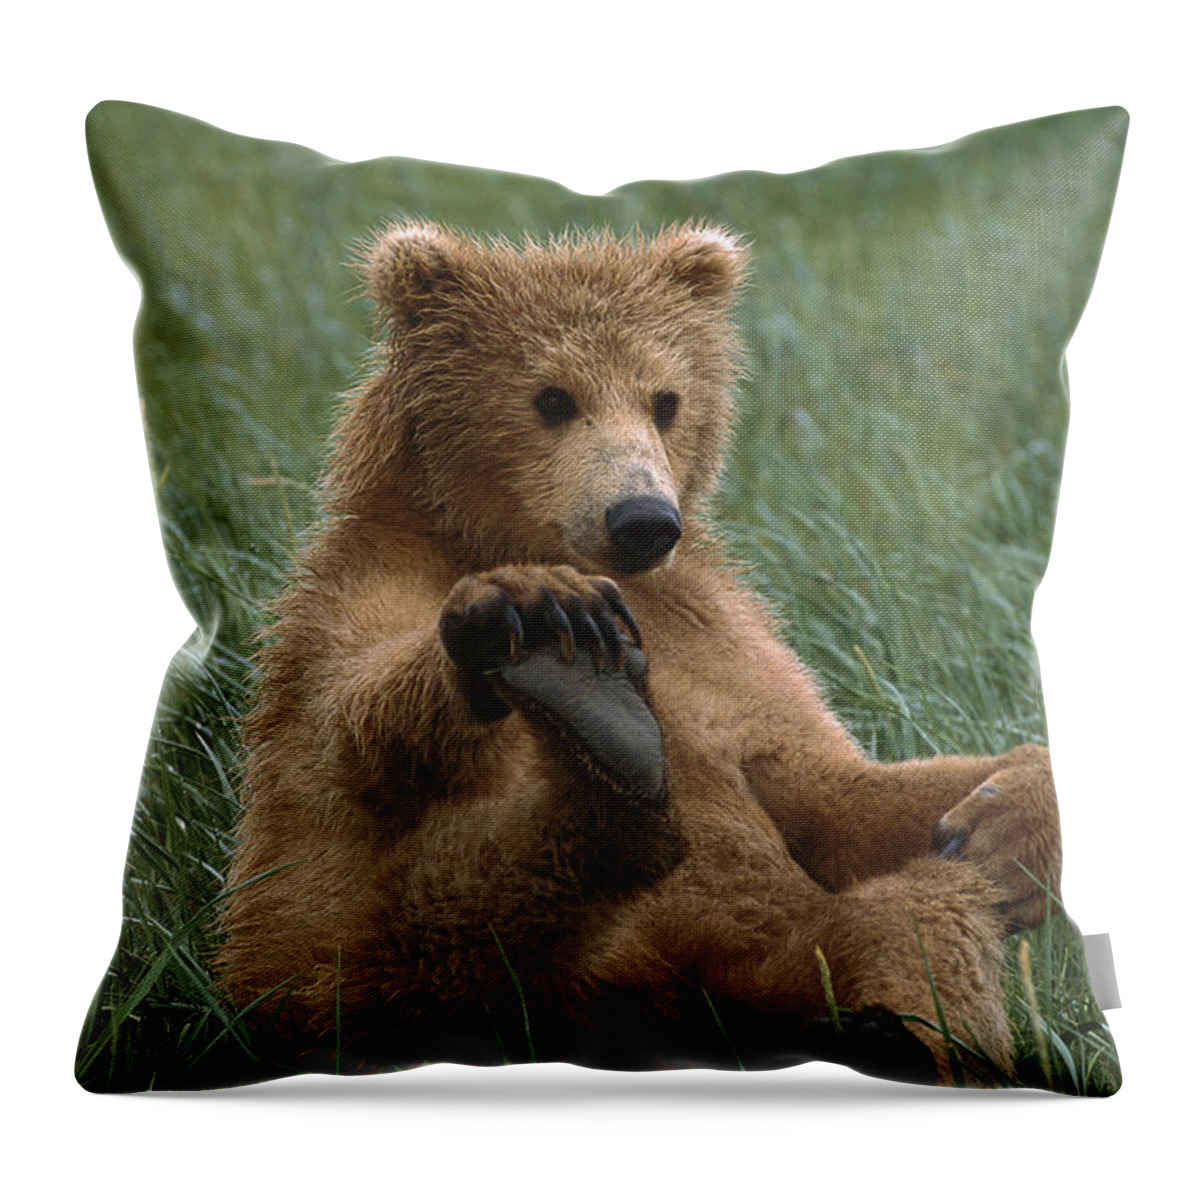 00784213 Throw Pillow featuring the photograph Grizzly Bear Cub Playing Katmai by Suzi Eszterhas